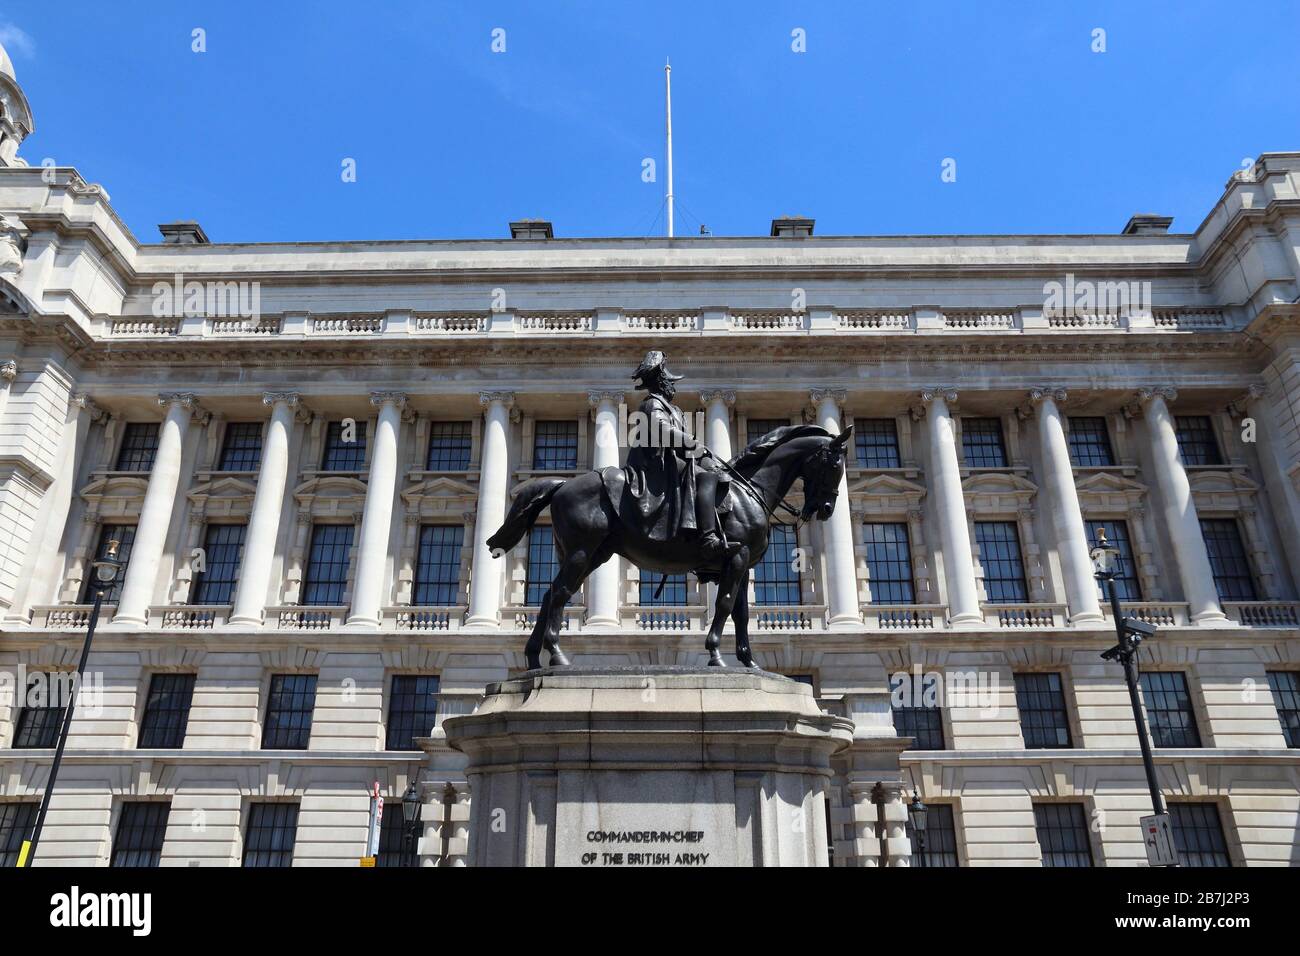 London, UK - governmental building at Whitehall. Old War Office. Stock Photo